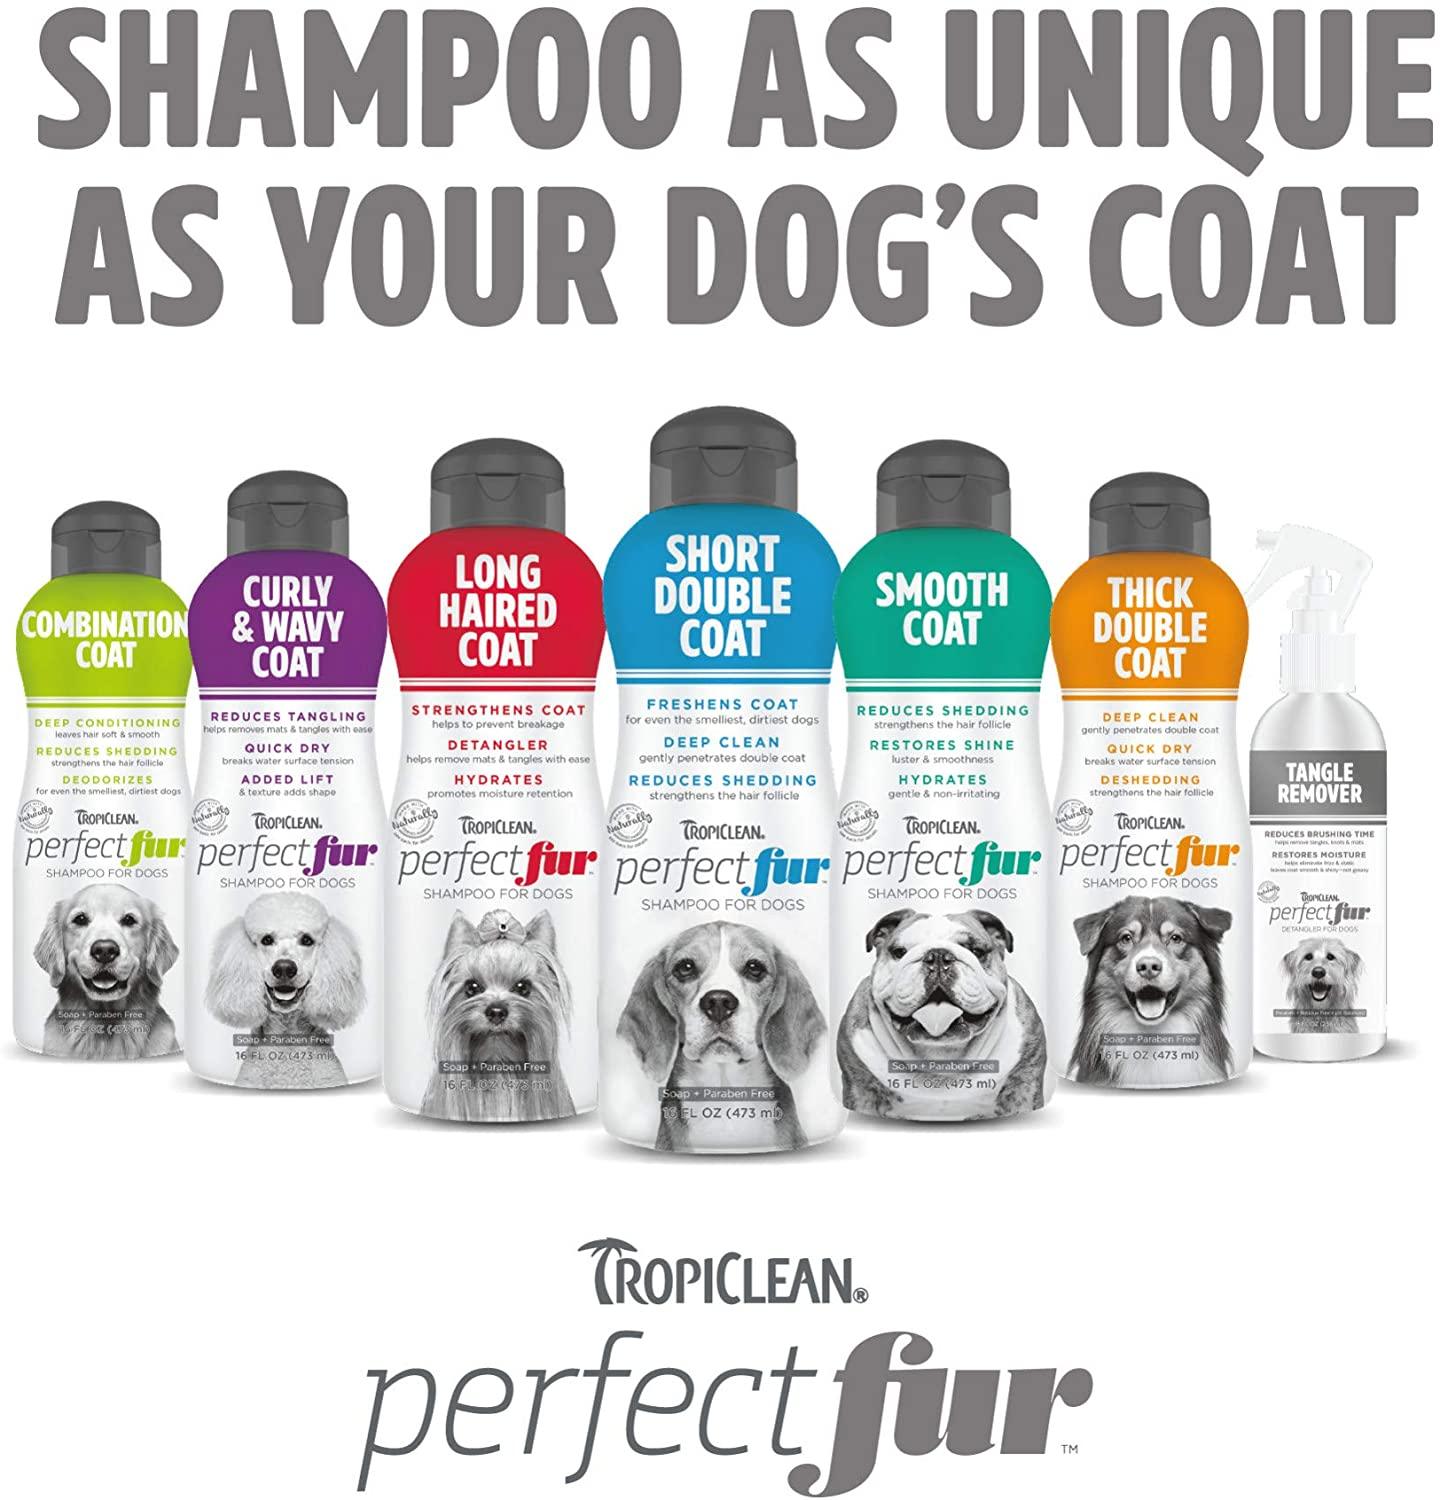 TropiClean Perfect Fur Short Double Coat Shampoo for Dogs (473ml) - Pet's Play Toy Store